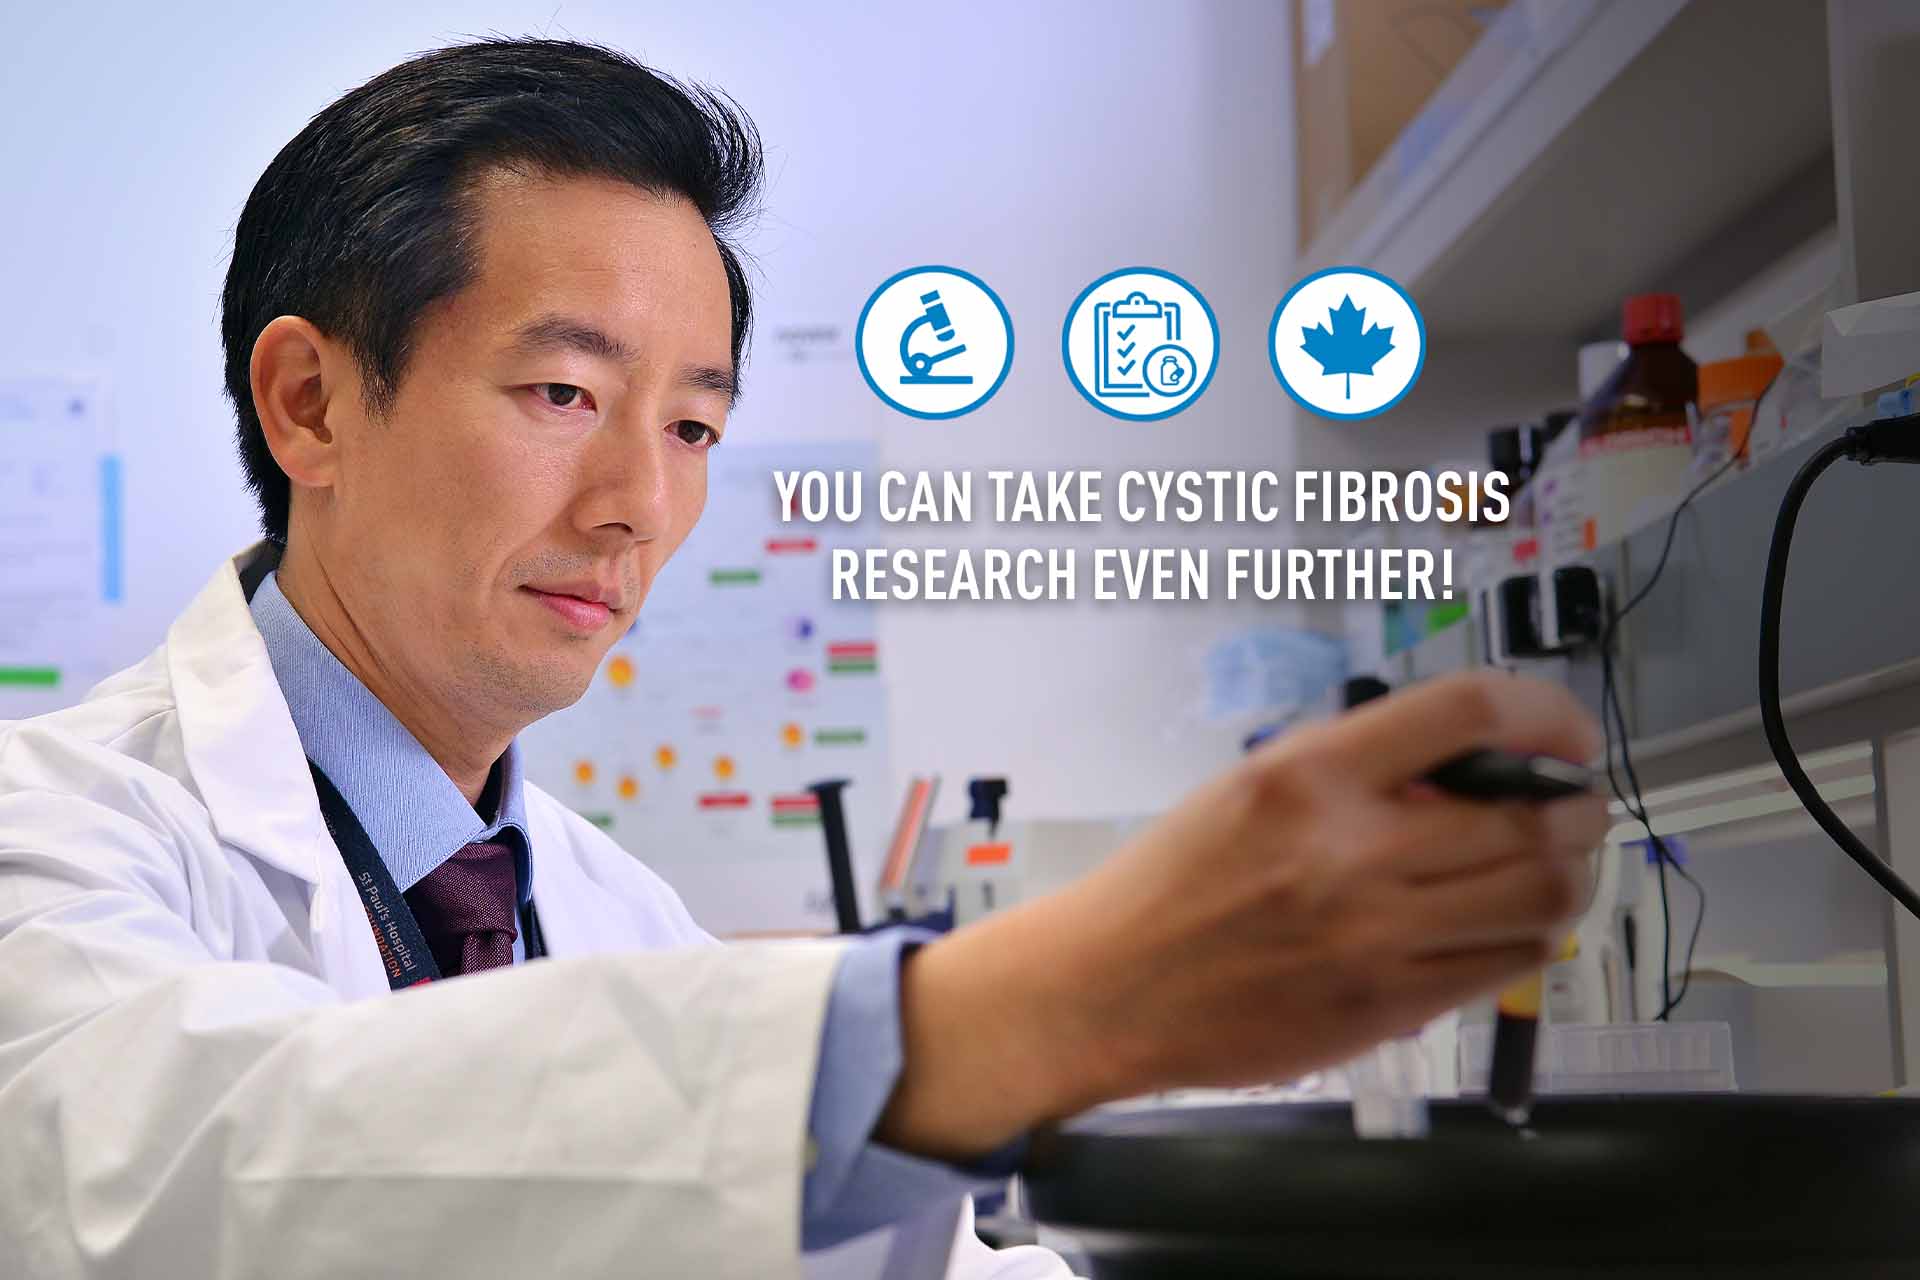 You can take cystic fibrosis research even further!